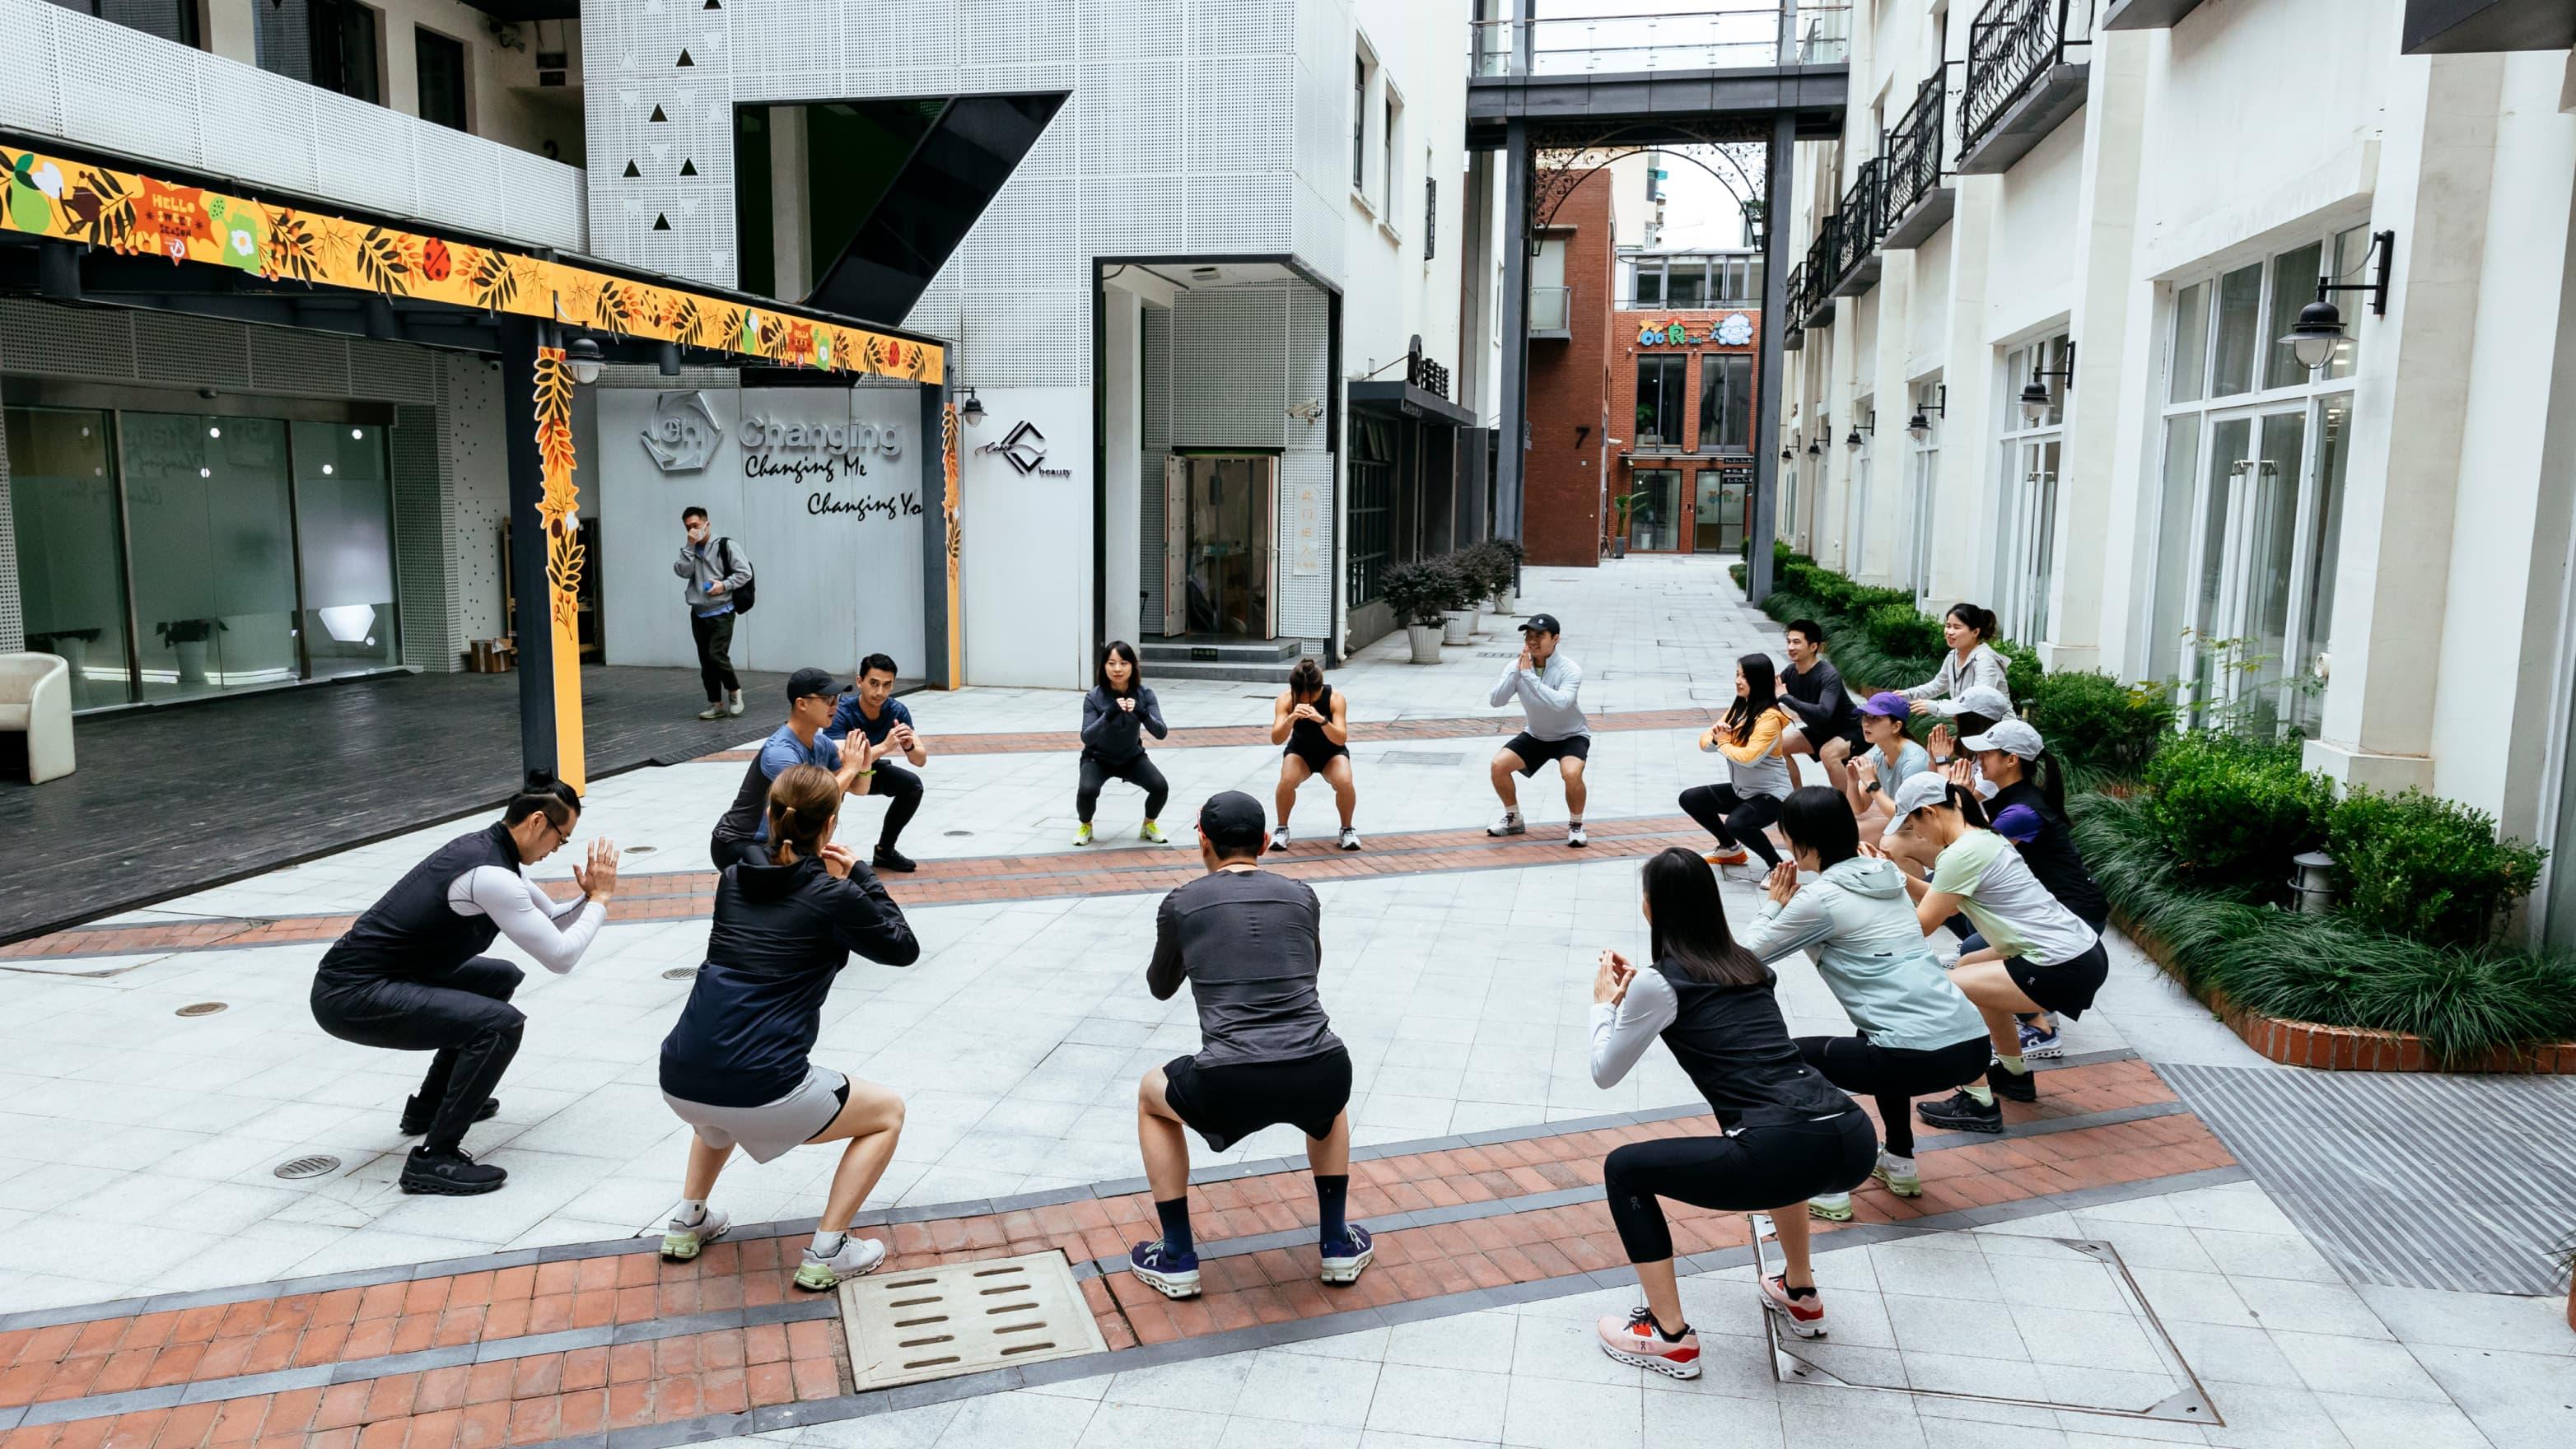 A group of people squats near the office building